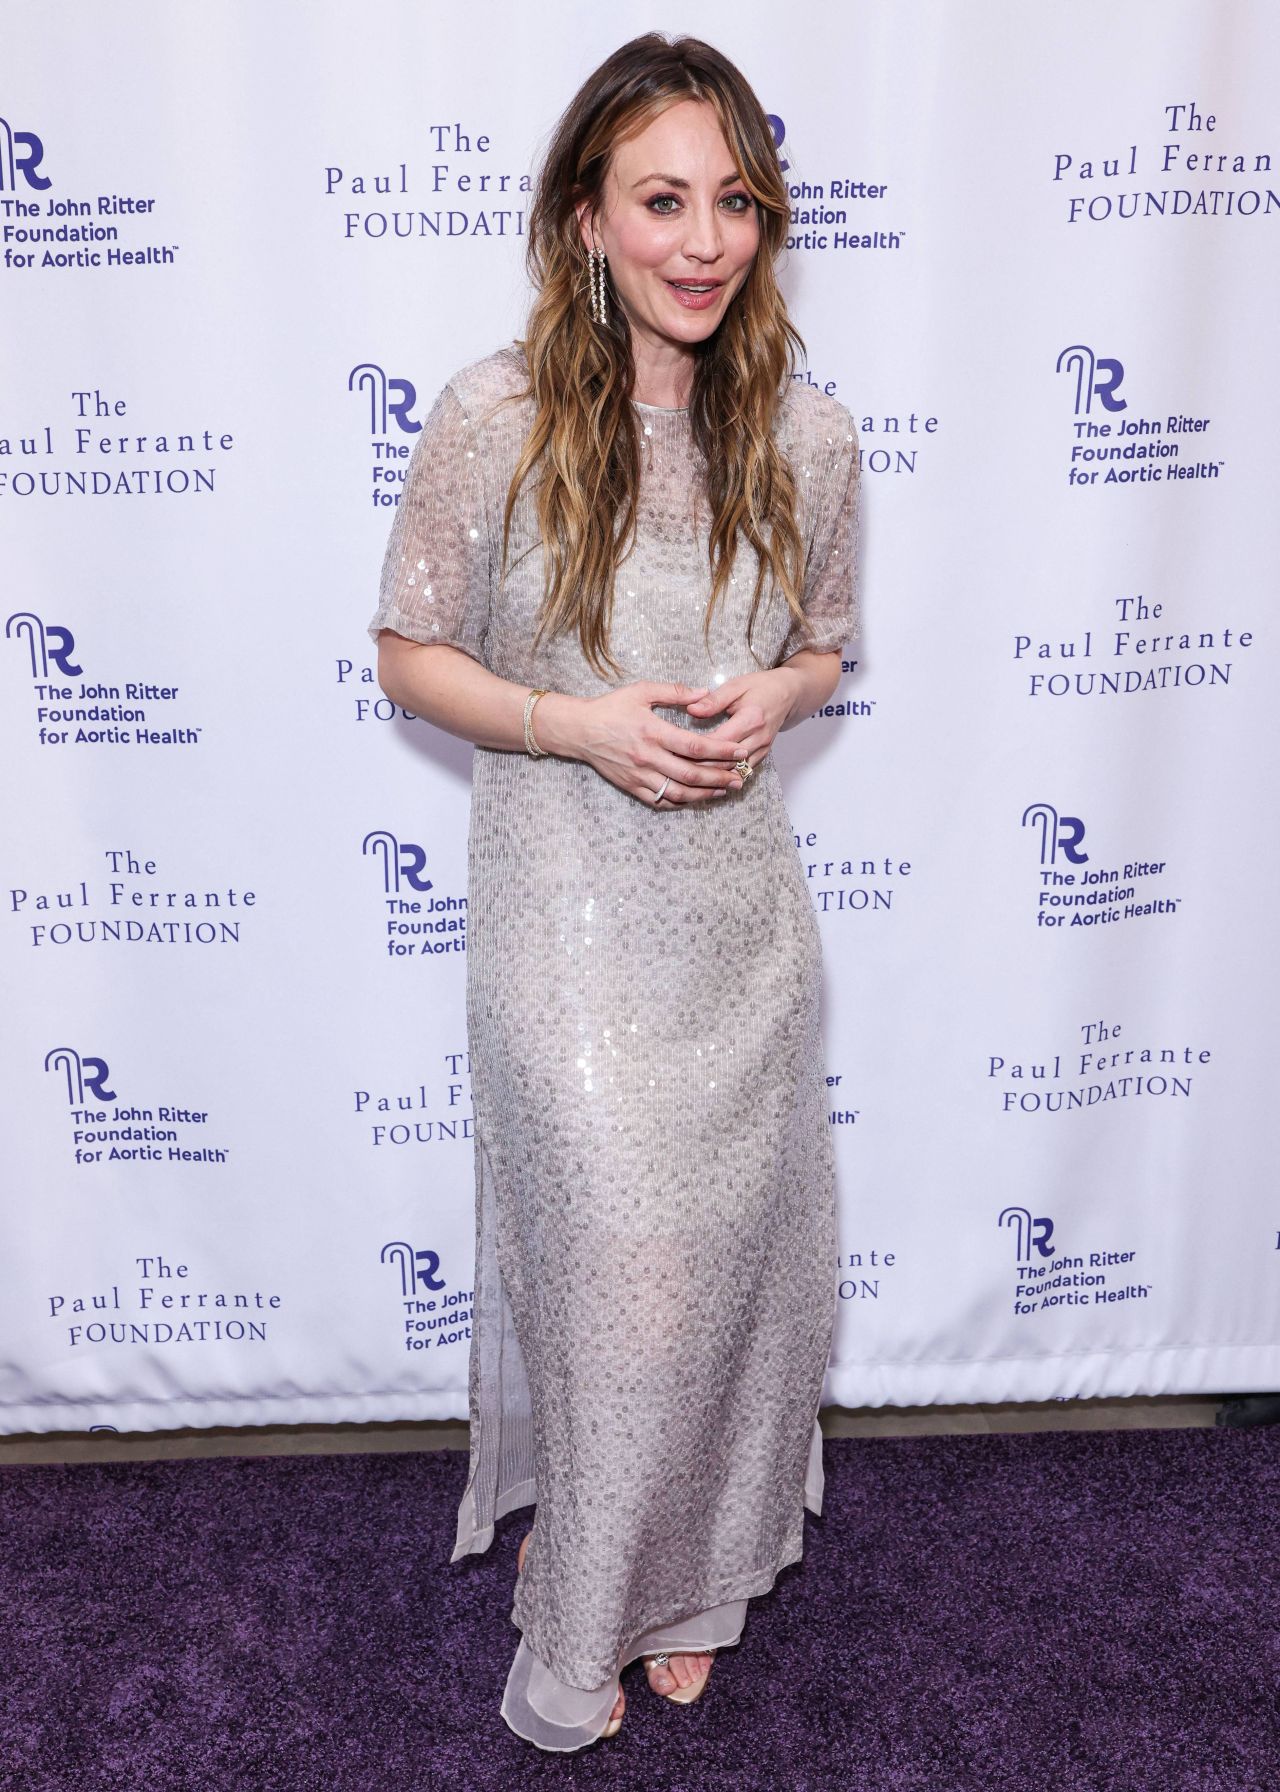 KALEY CUOCO THE JOHN RITTER FOUNDATION FOR AORTIC HEALTH EVENING FROM THE HEART GALA05